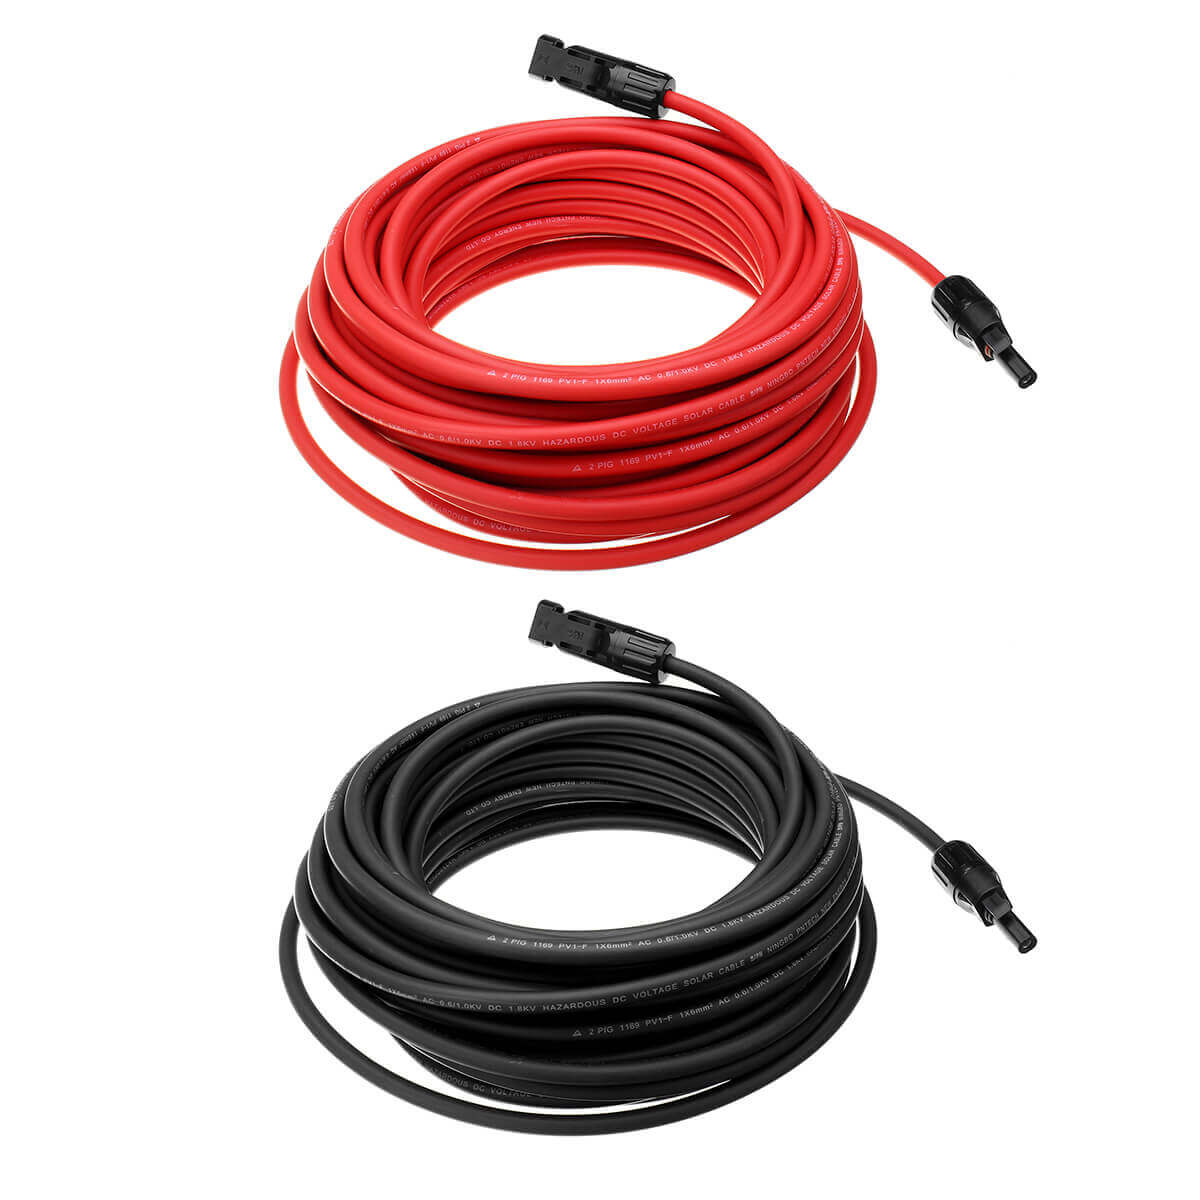 MC4 50 Foot Extender Cable